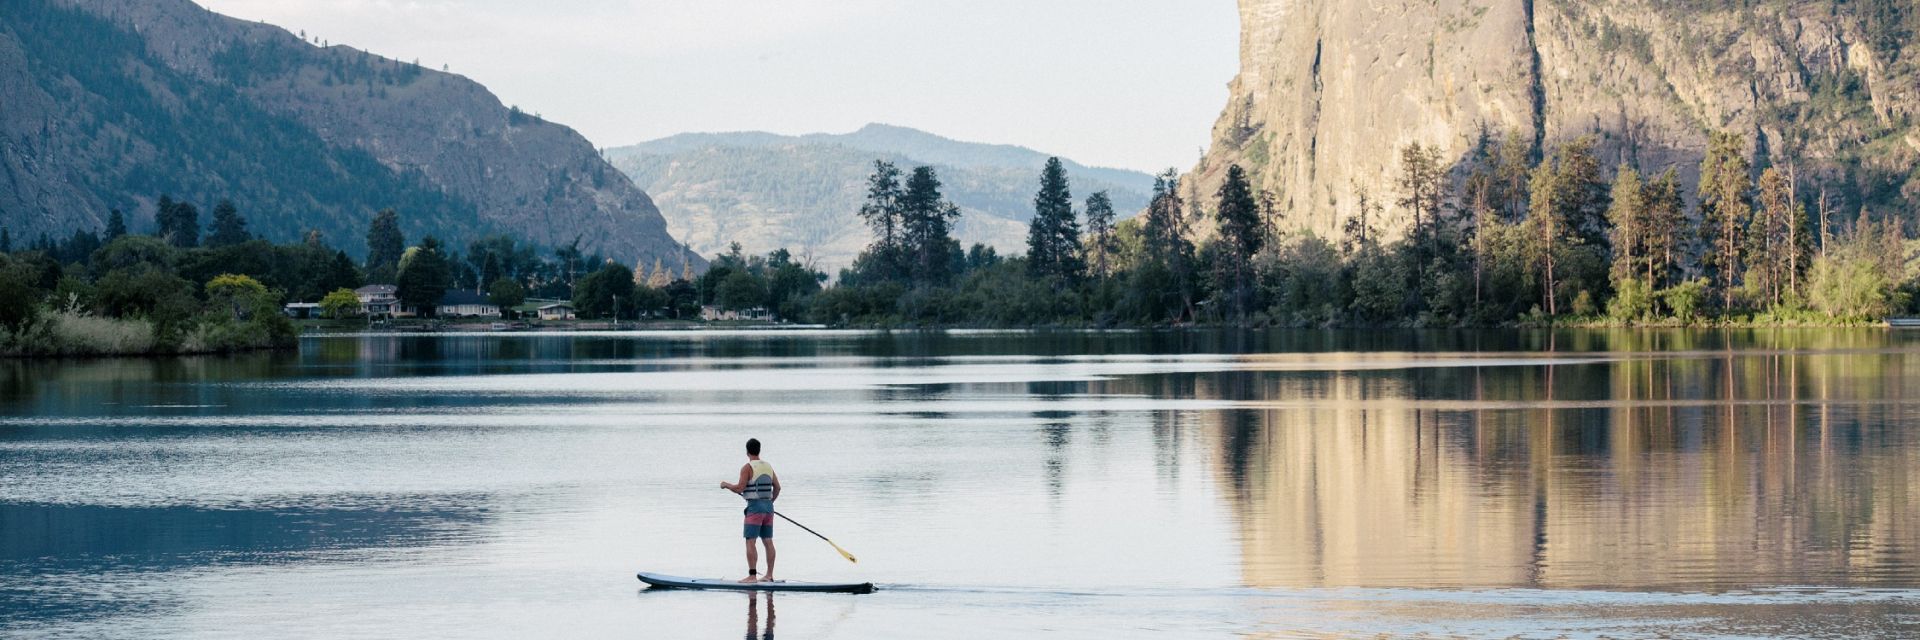 Stand up paddle boarding on Vaseux Lake in the Okanagan Valley